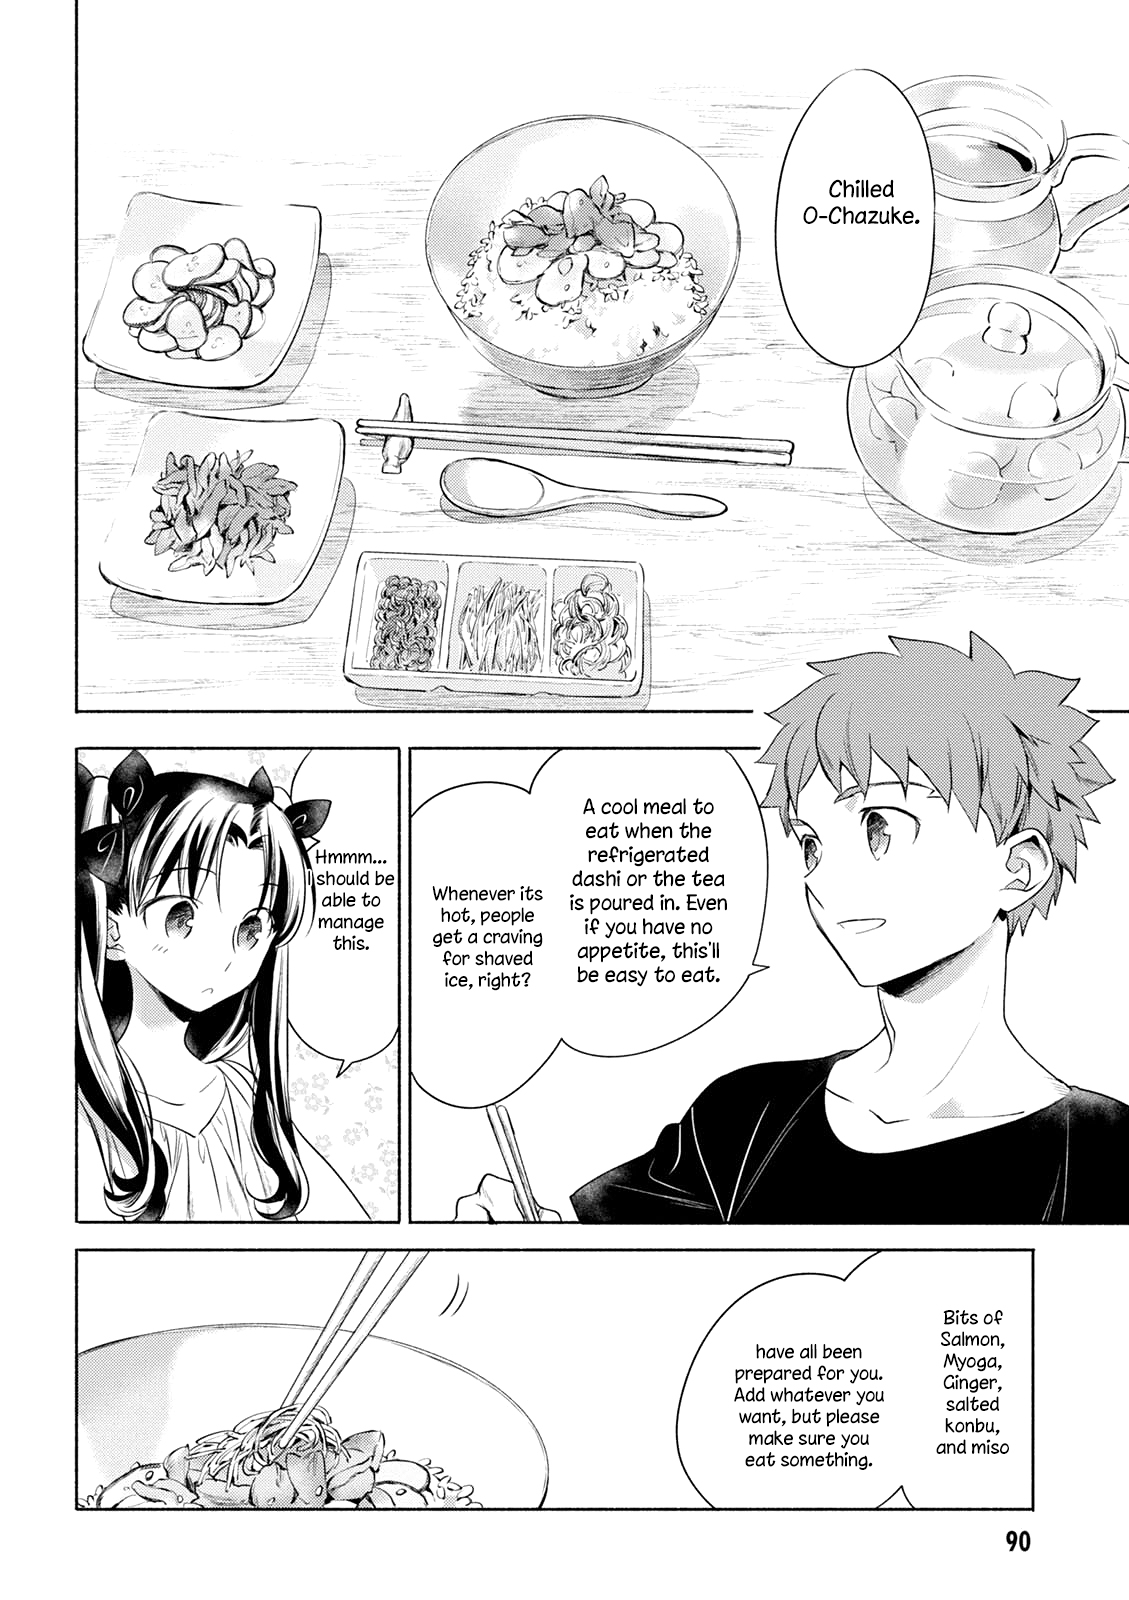 What's Cooking at the Emiya Residence Today? Ch. 7